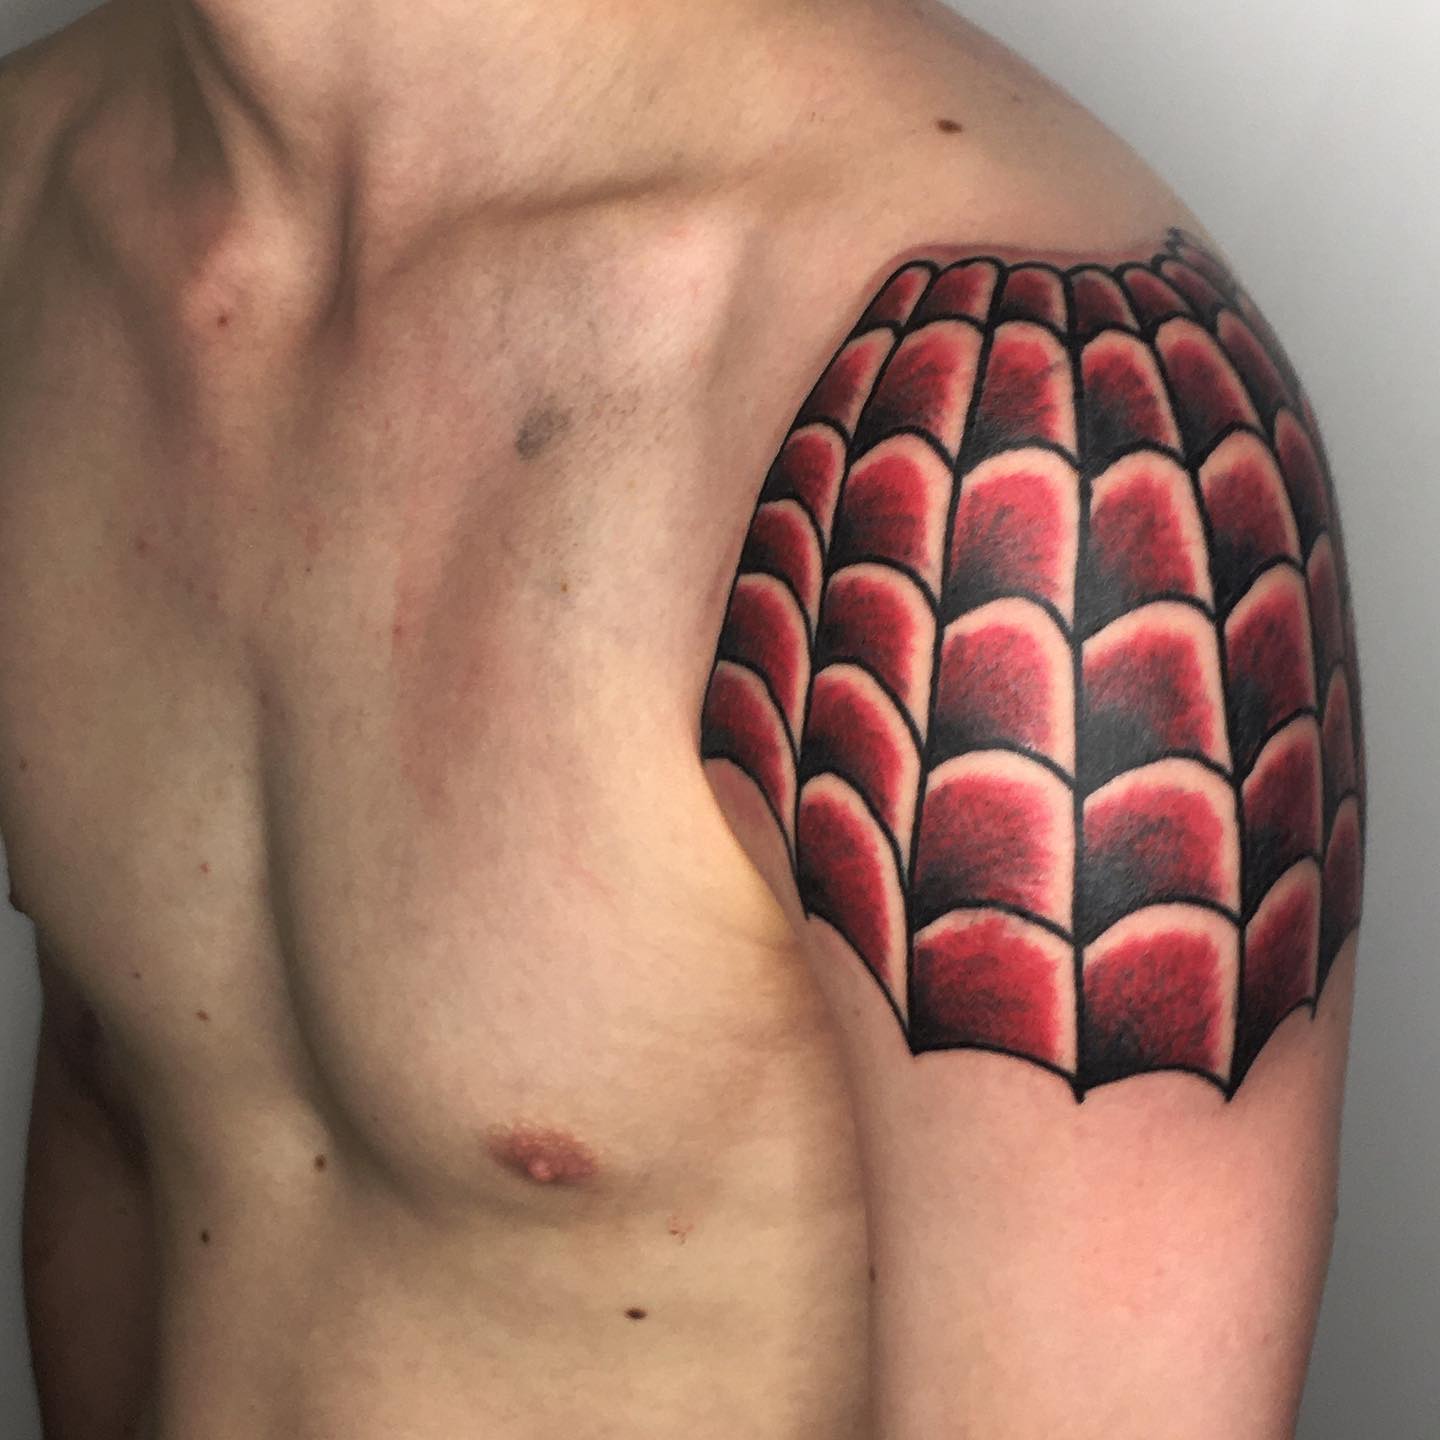 An unusual take on a spider tattoo, yet something that truly works and looks so good! If you want a pop of color to your design, give this one a go.